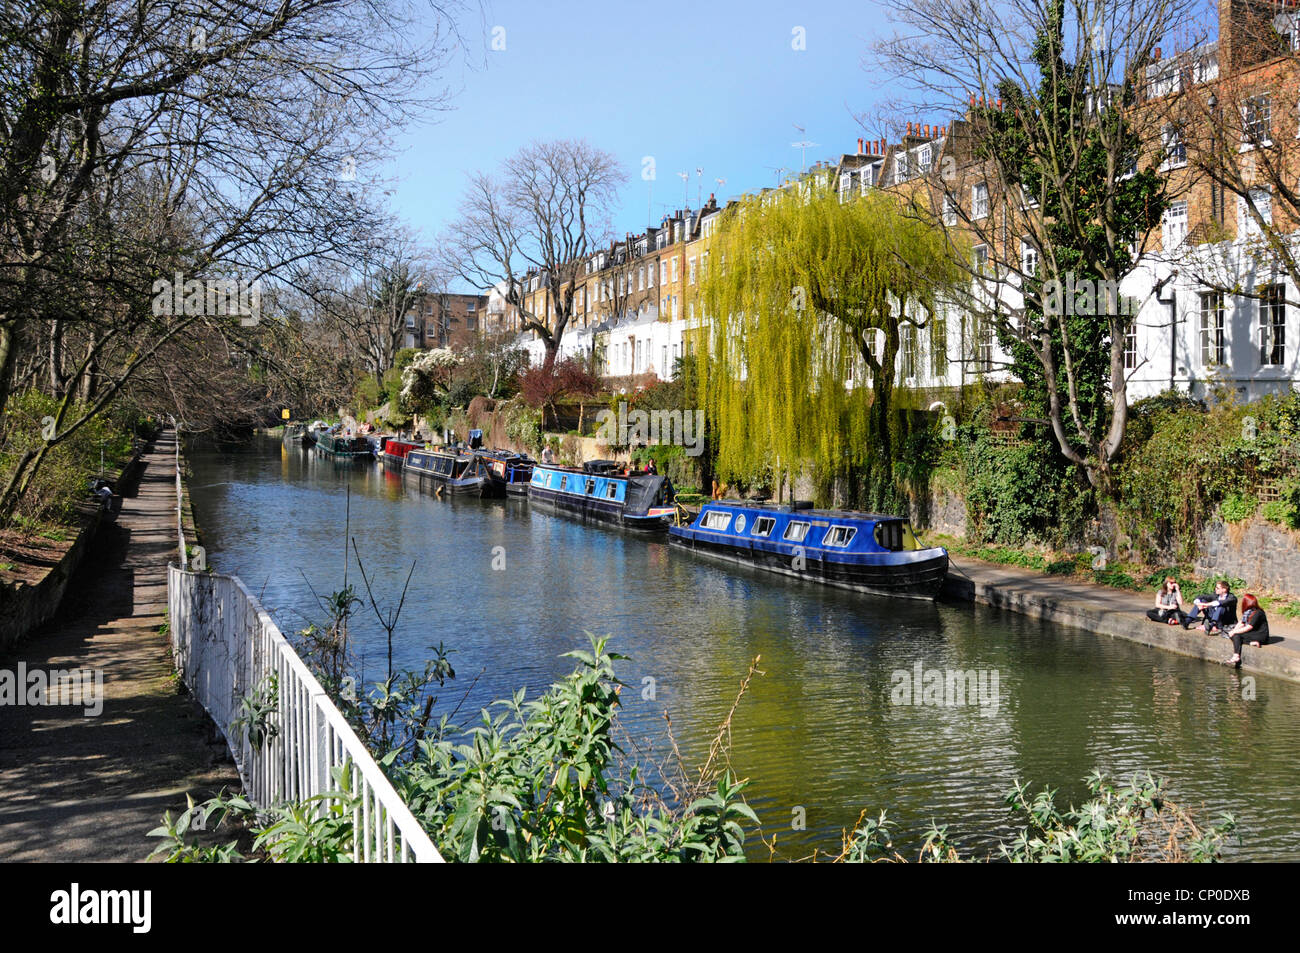 Sunny Regents Canal narrowboat moorings & real estate property people walking towpath spring colour on Weeping Willow tree Islington London England UK Stock Photo